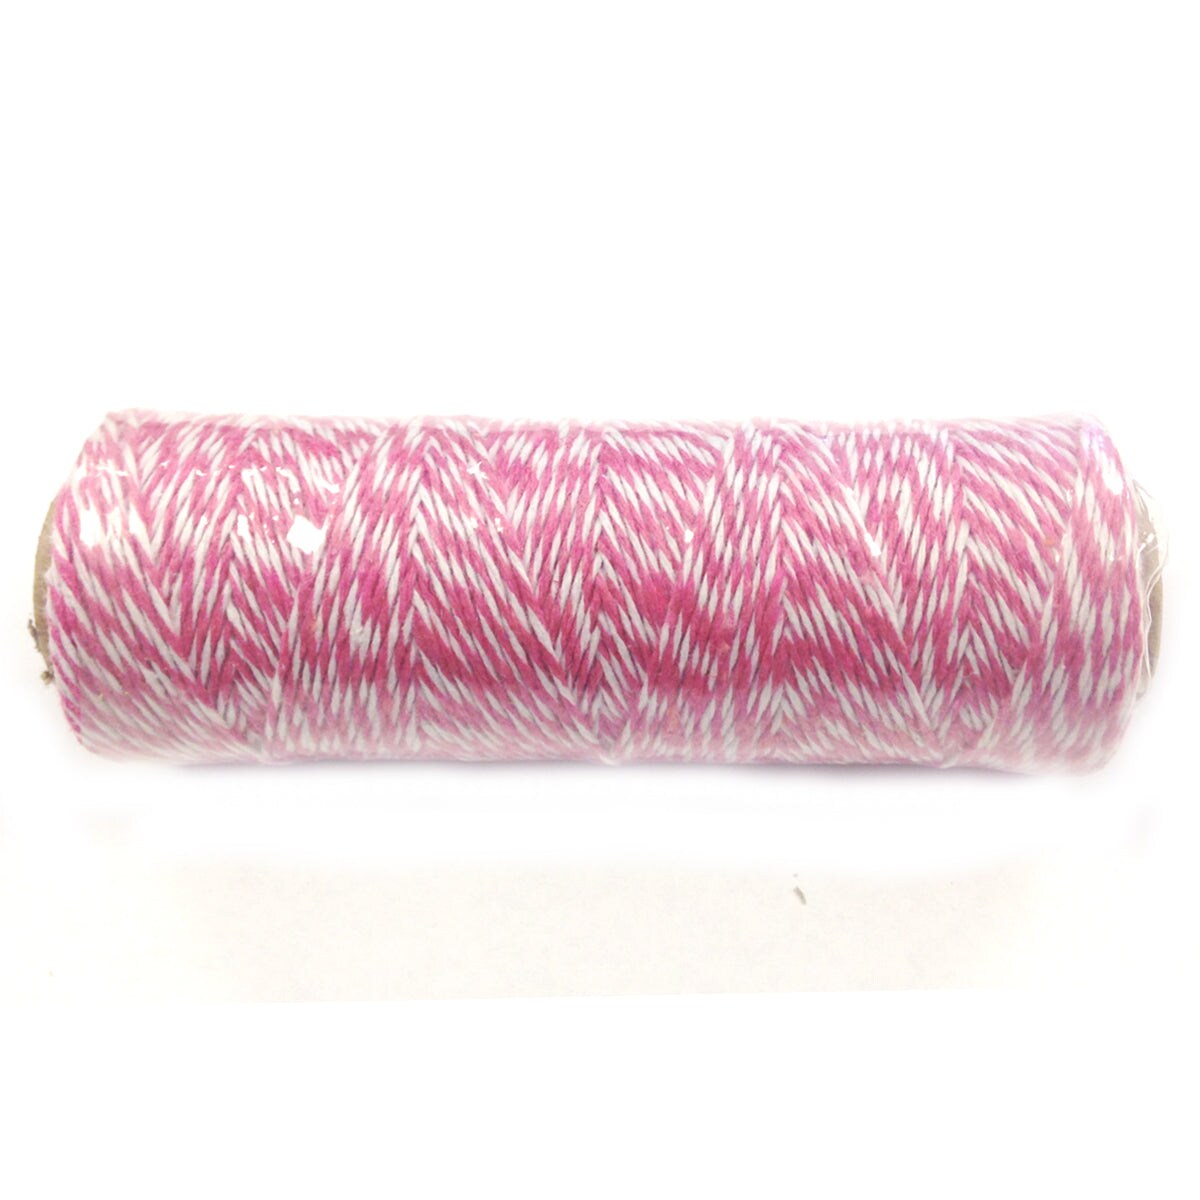 Wrapables 4ply 109 Yard (100m) Cotton Baker's Twine Ribbon Twine for Baking & Crafts